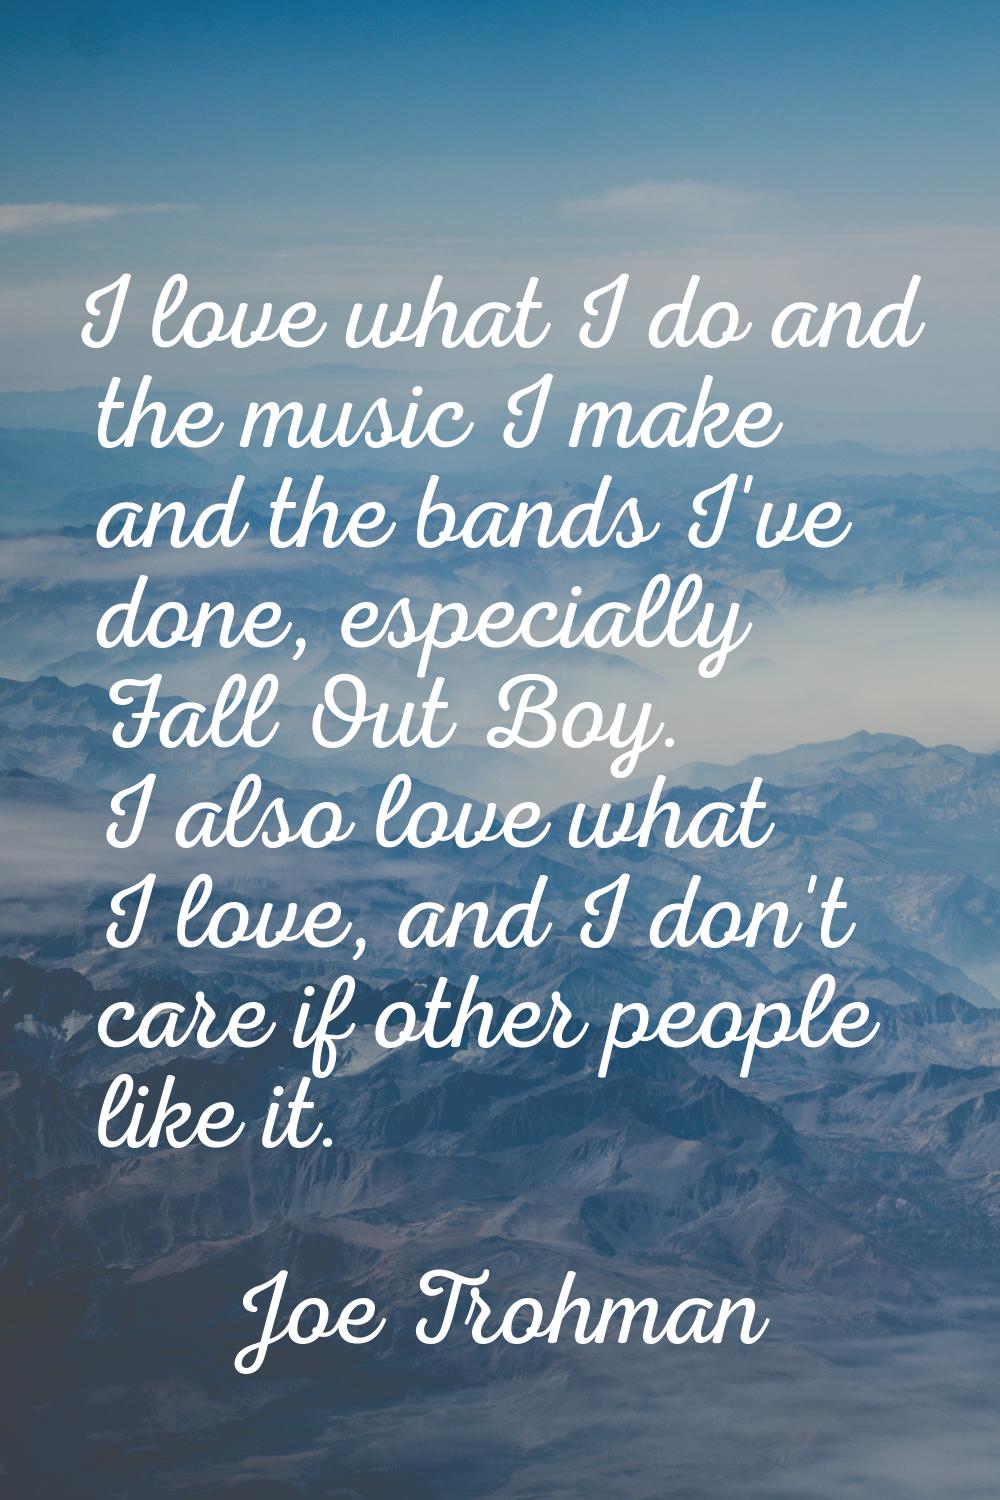 I love what I do and the music I make and the bands I've done, especially Fall Out Boy. I also love